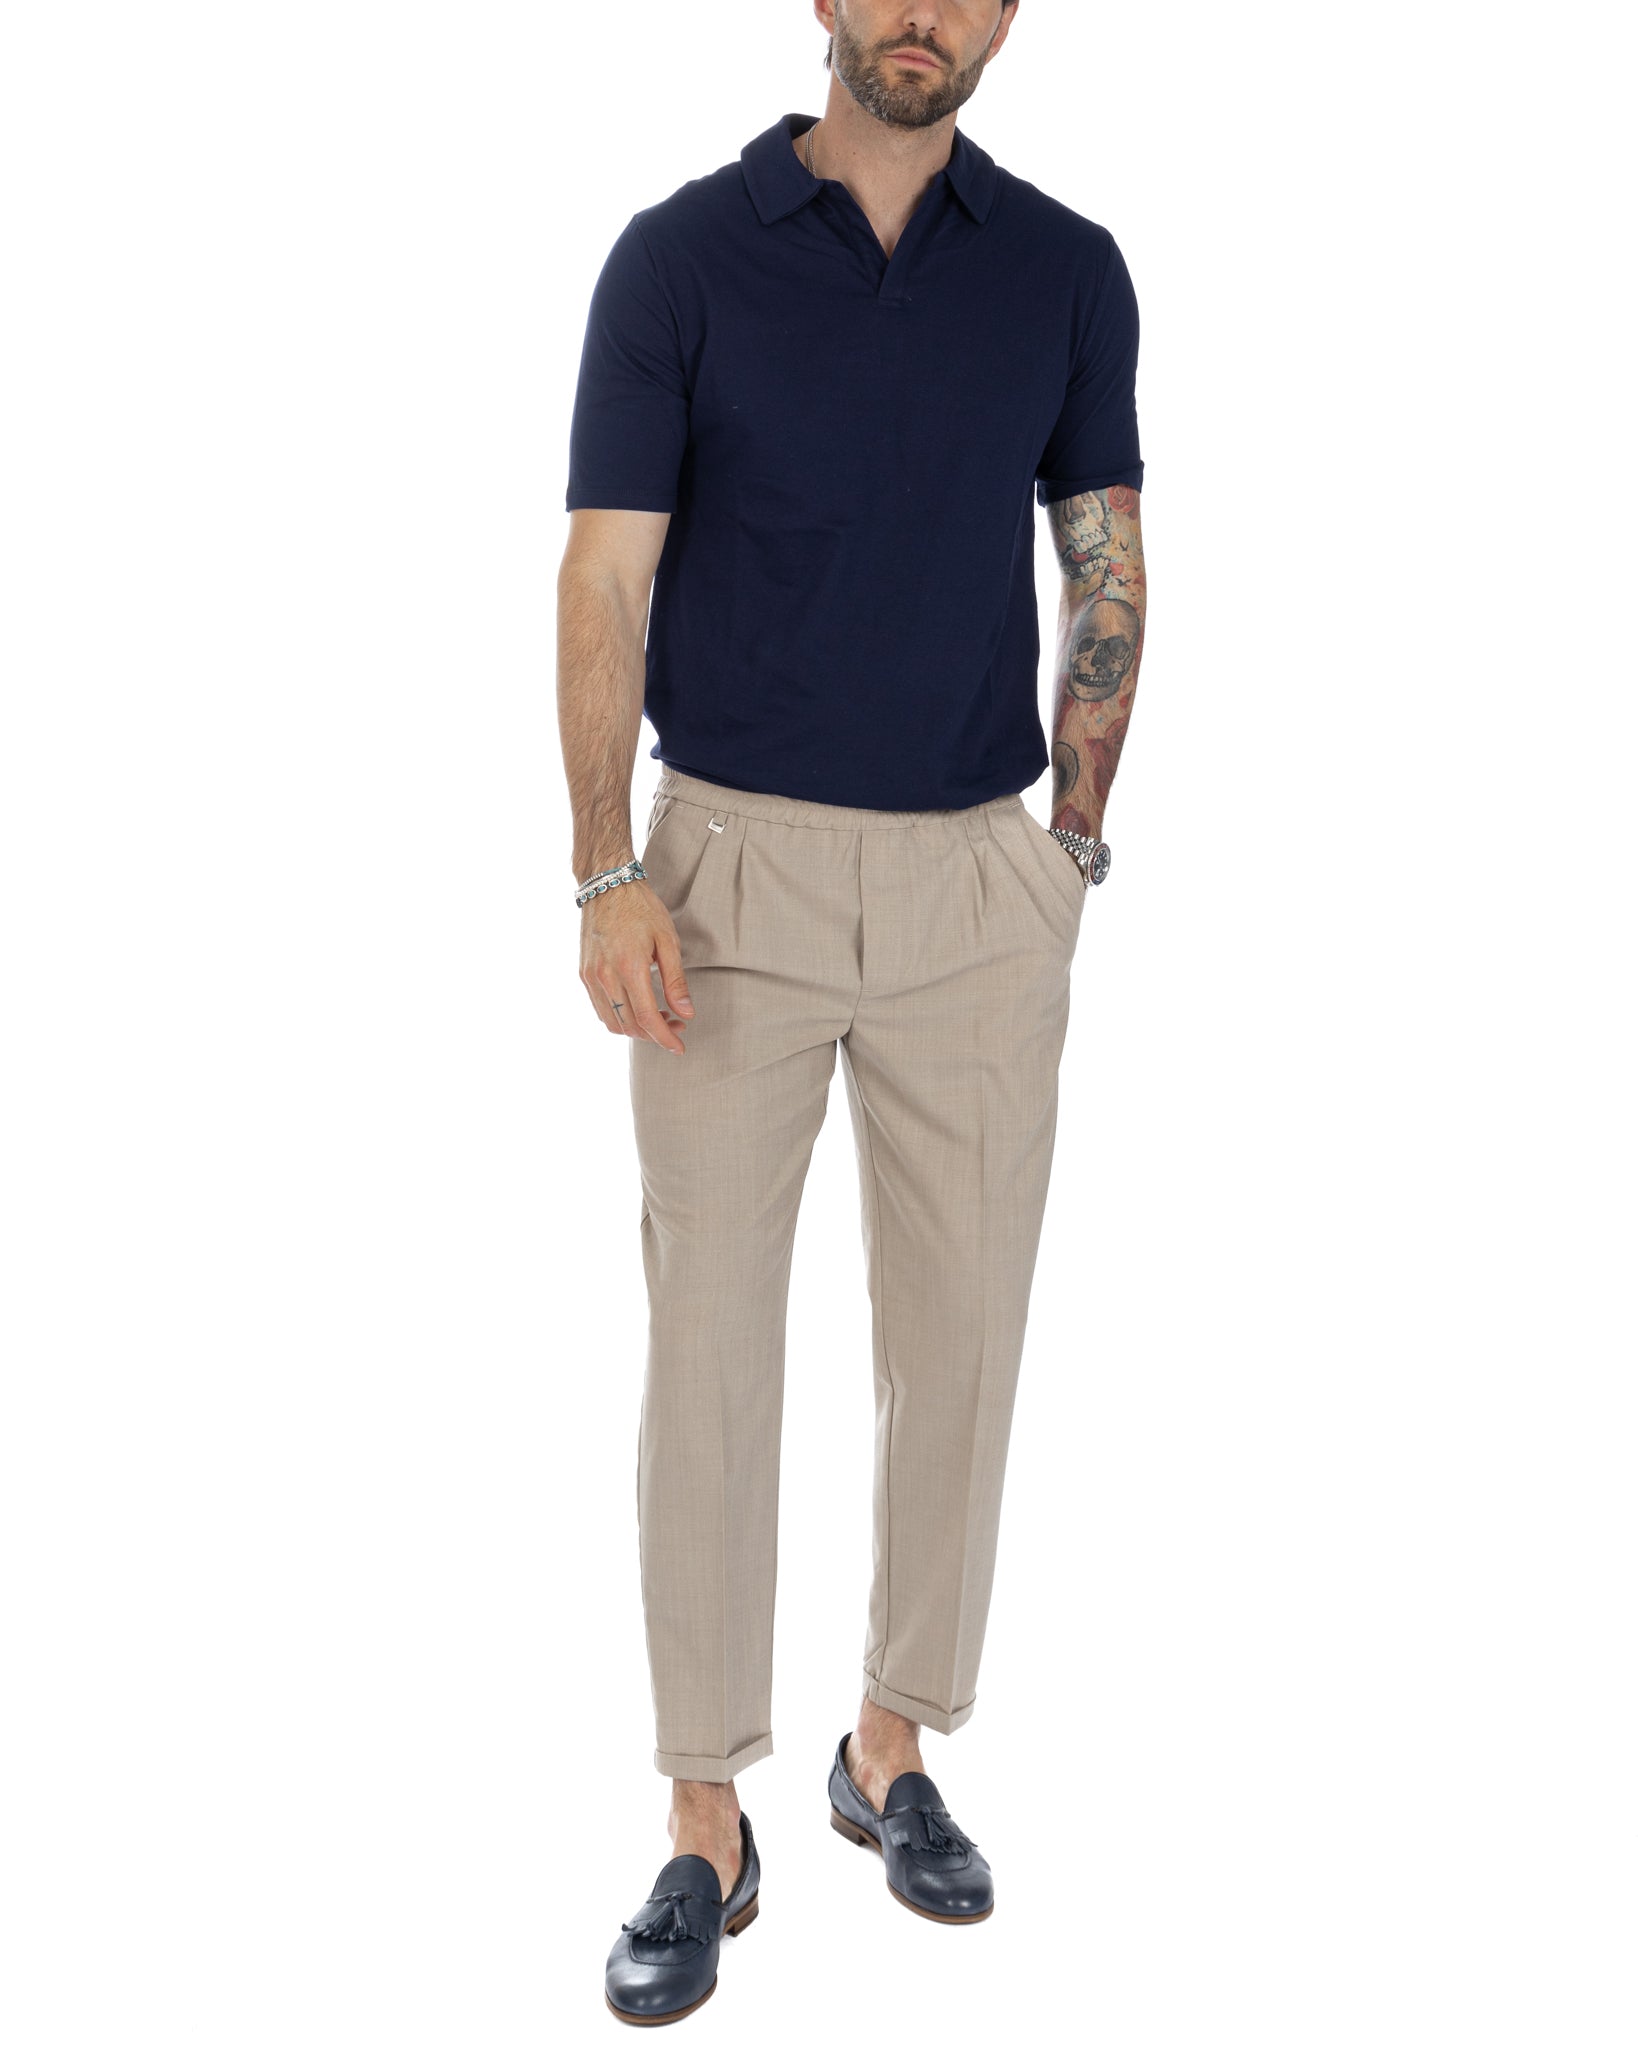 Larry - sand wool blend trousers